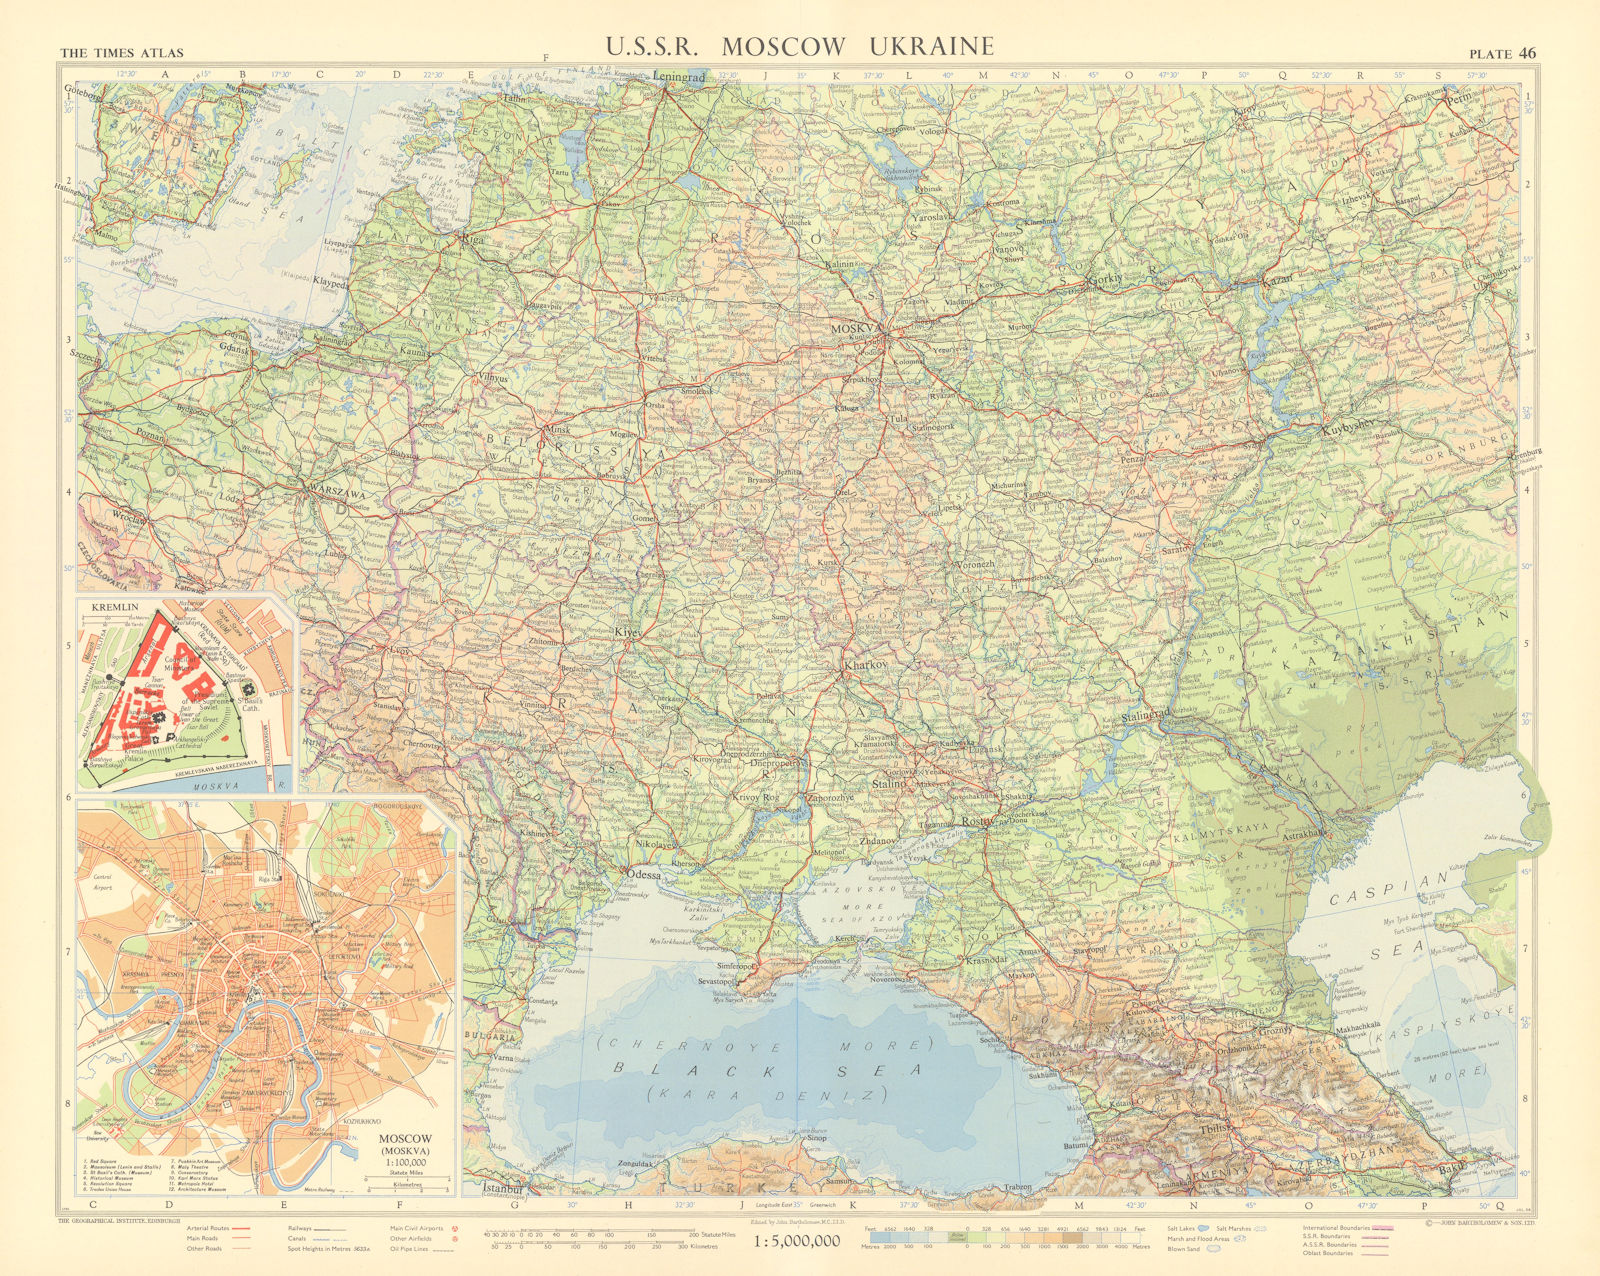 Southwest Russia & Ukraine. USSR. Moscow & Kremlin plans. TIMES 1959 old map